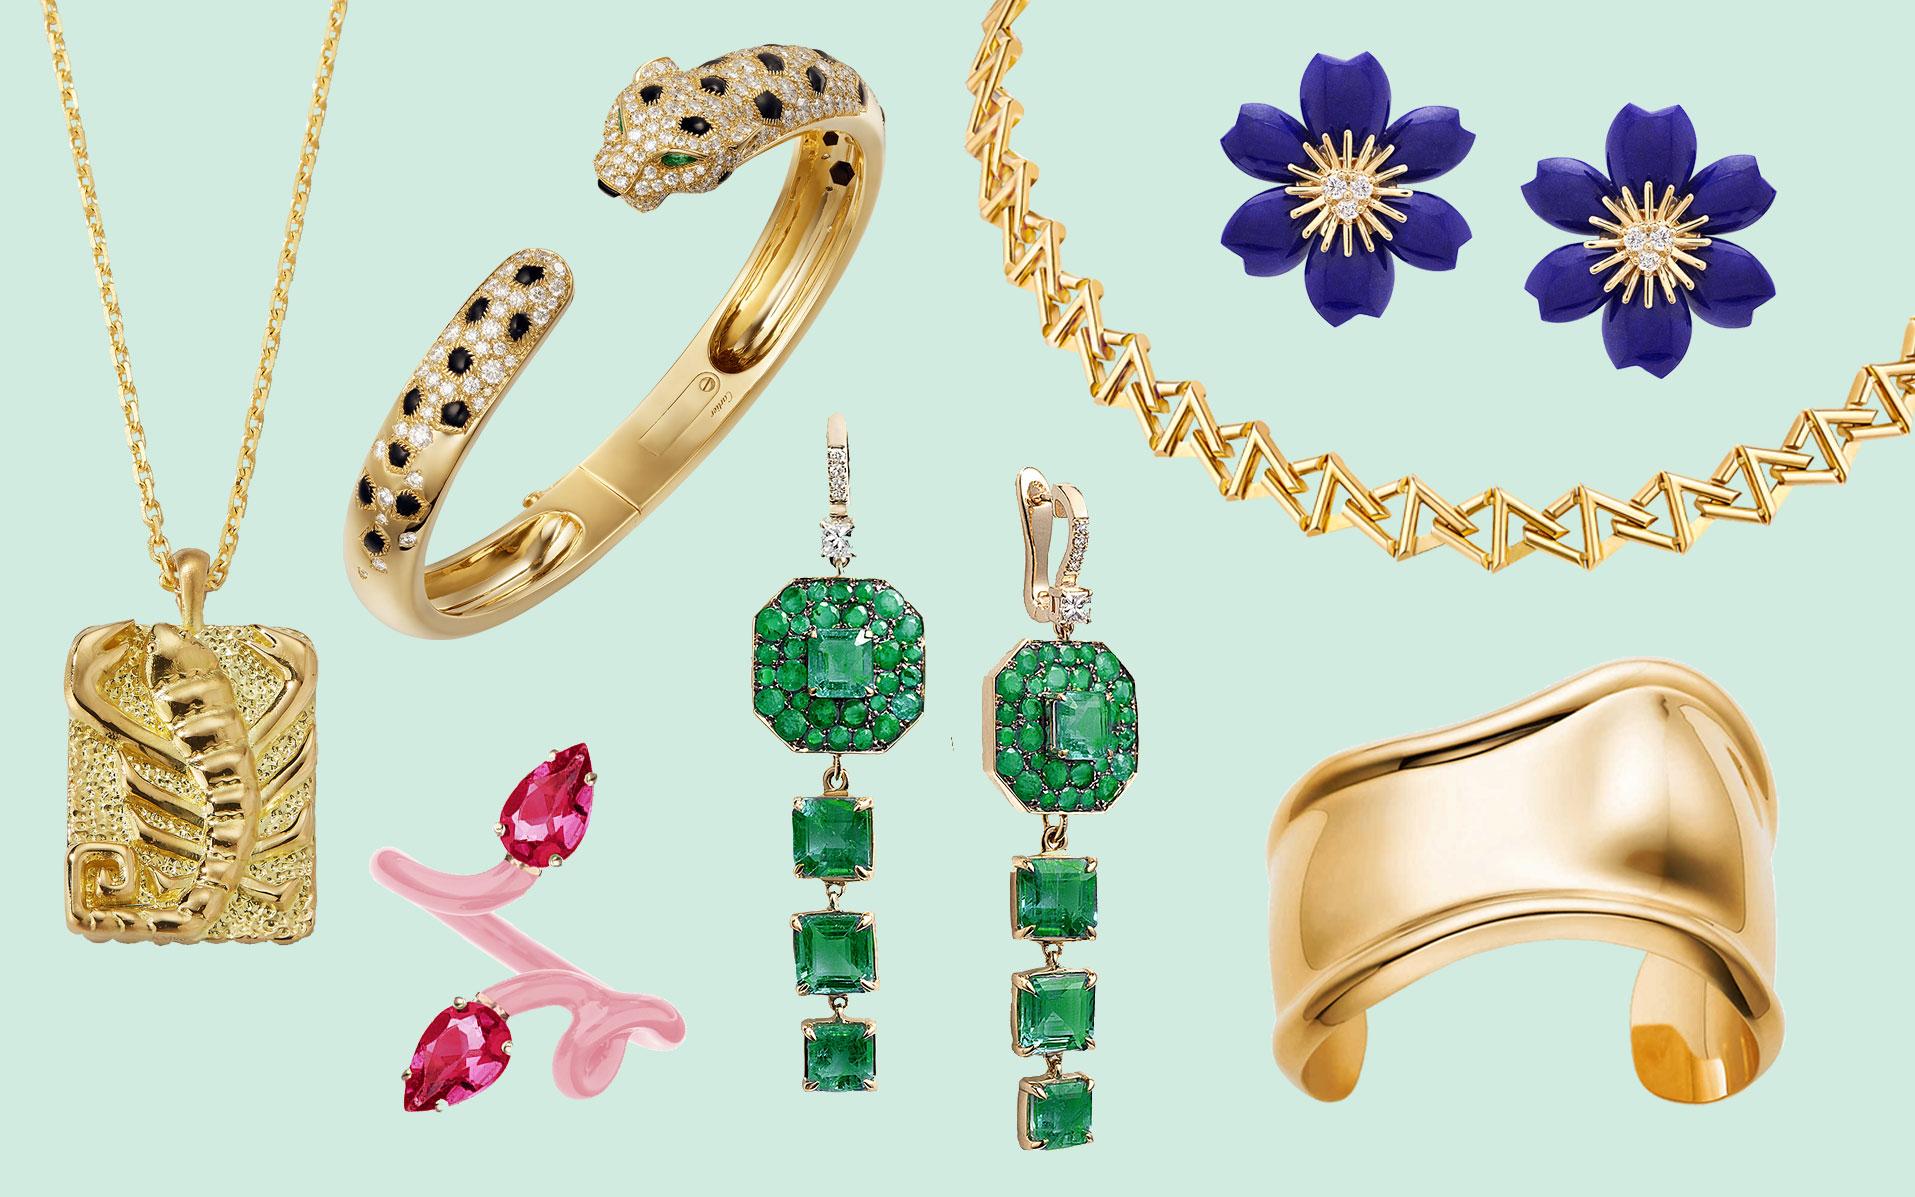 A collecting guide to the jewellery of Van Cleef & Arpels